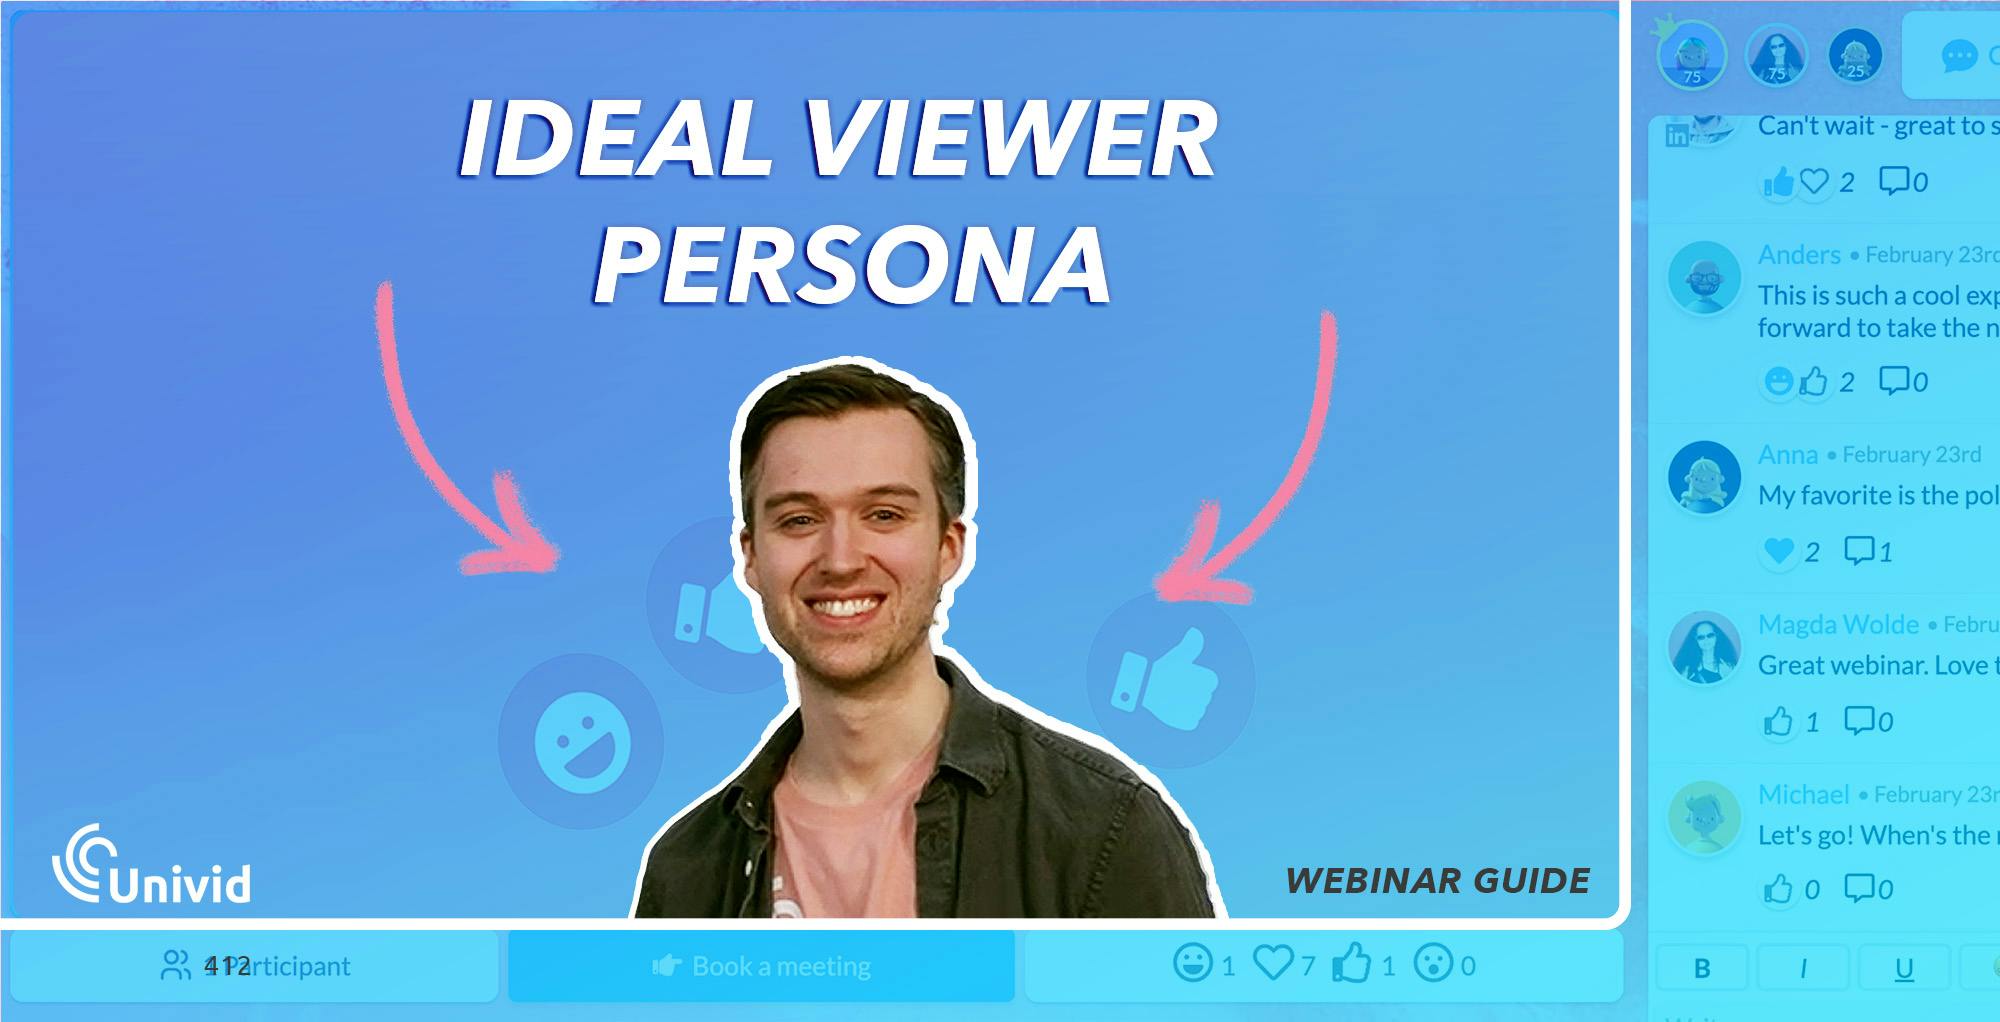 Ideal Viewer Persona - Video, marketing, and webinars